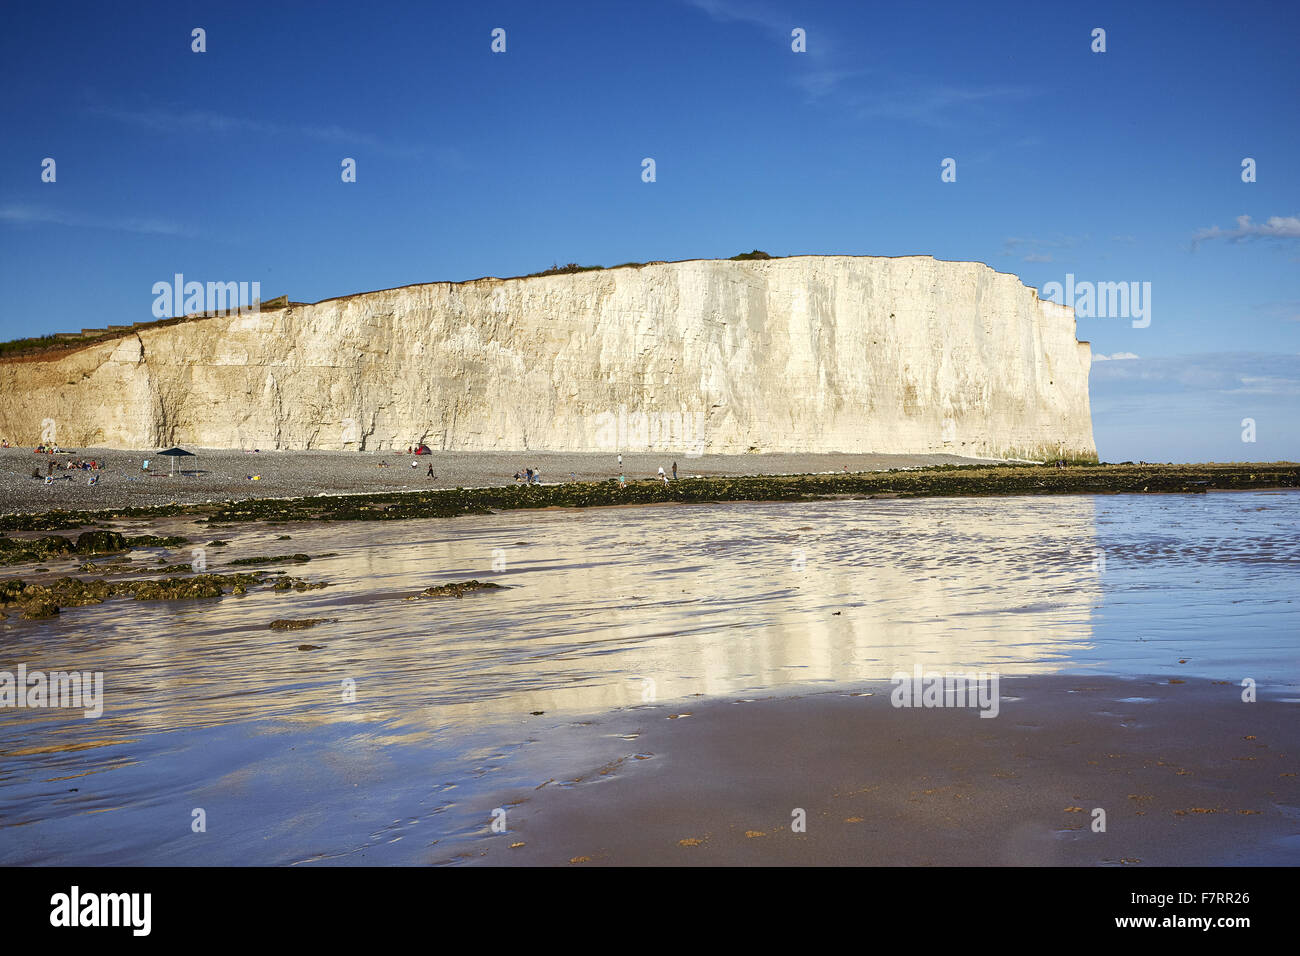 Birling Gap and the Seven Sisters, East Sussex. Stretching between Birling Gap and Cuckmere Haven are the world-famous Seven Sisters chalk cliffs. Stock Photo